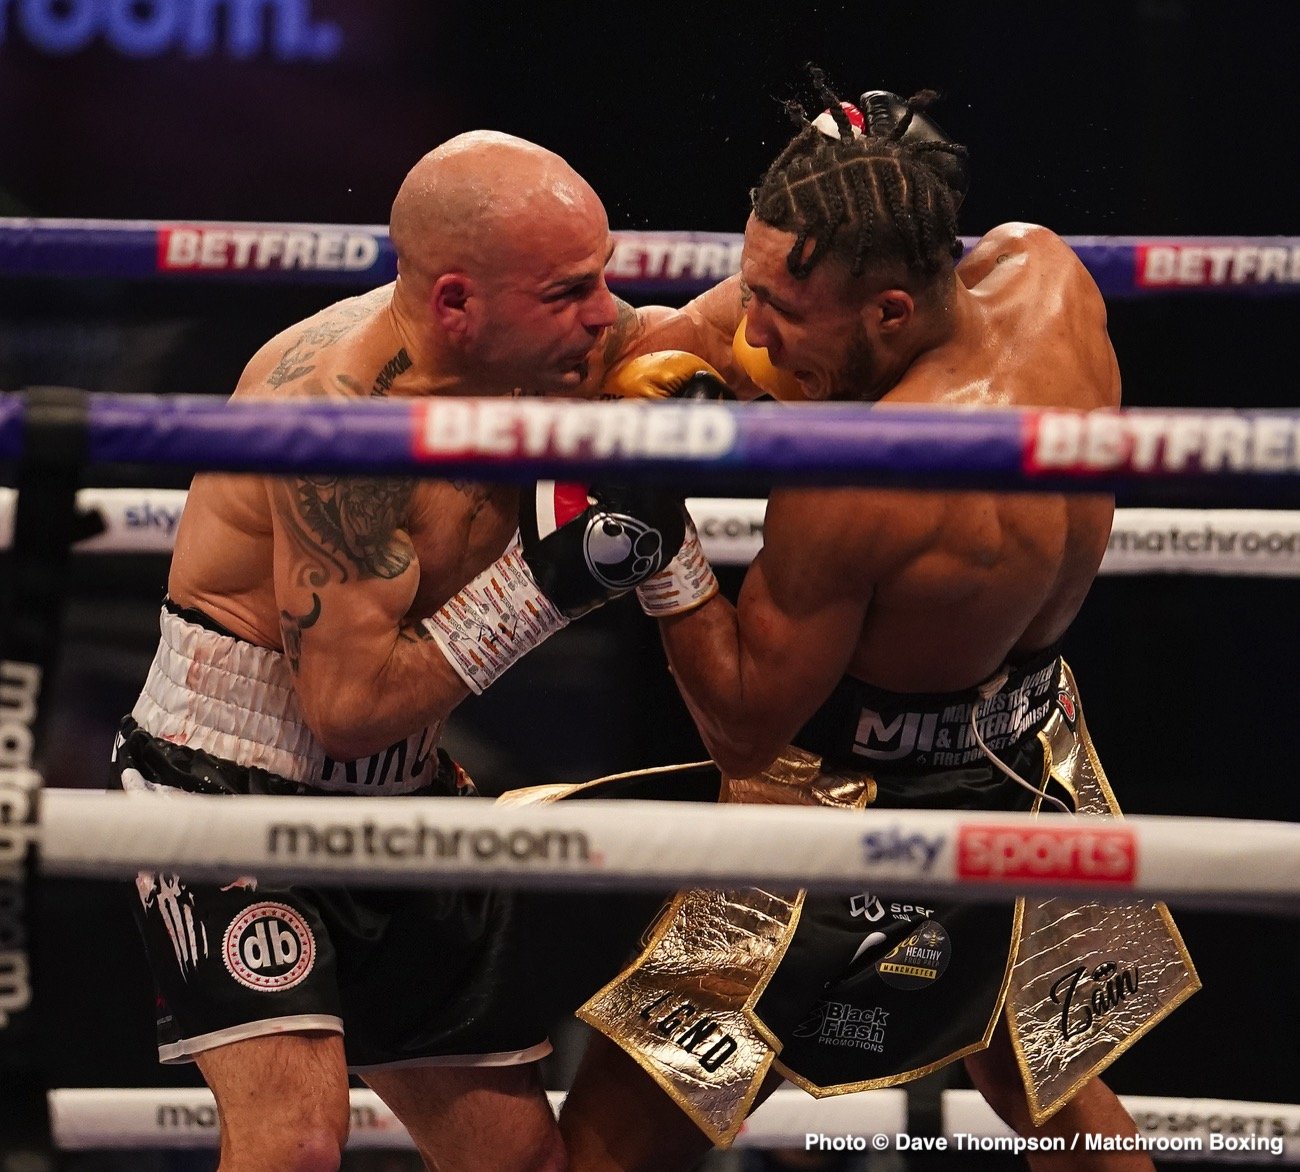 Seriously Bad Scoring Tainted A Dramatic Night At Wembley: How Are We Going To Bring Foreign Fighters To This Country?